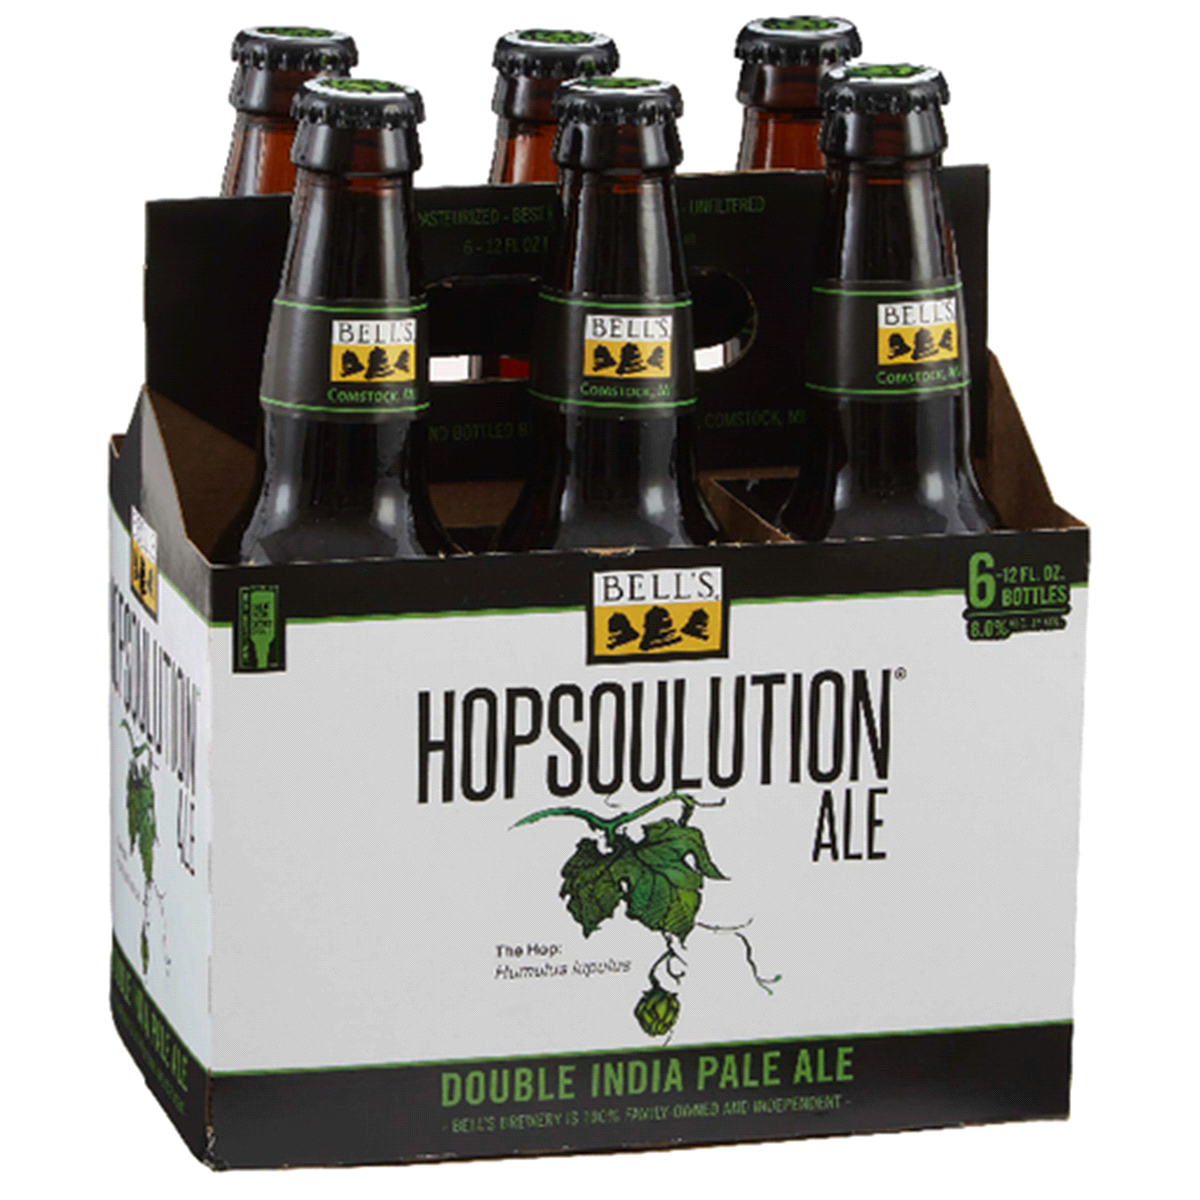 images/beer/IPA BEER/Bell's Hopsoulution Ale.png